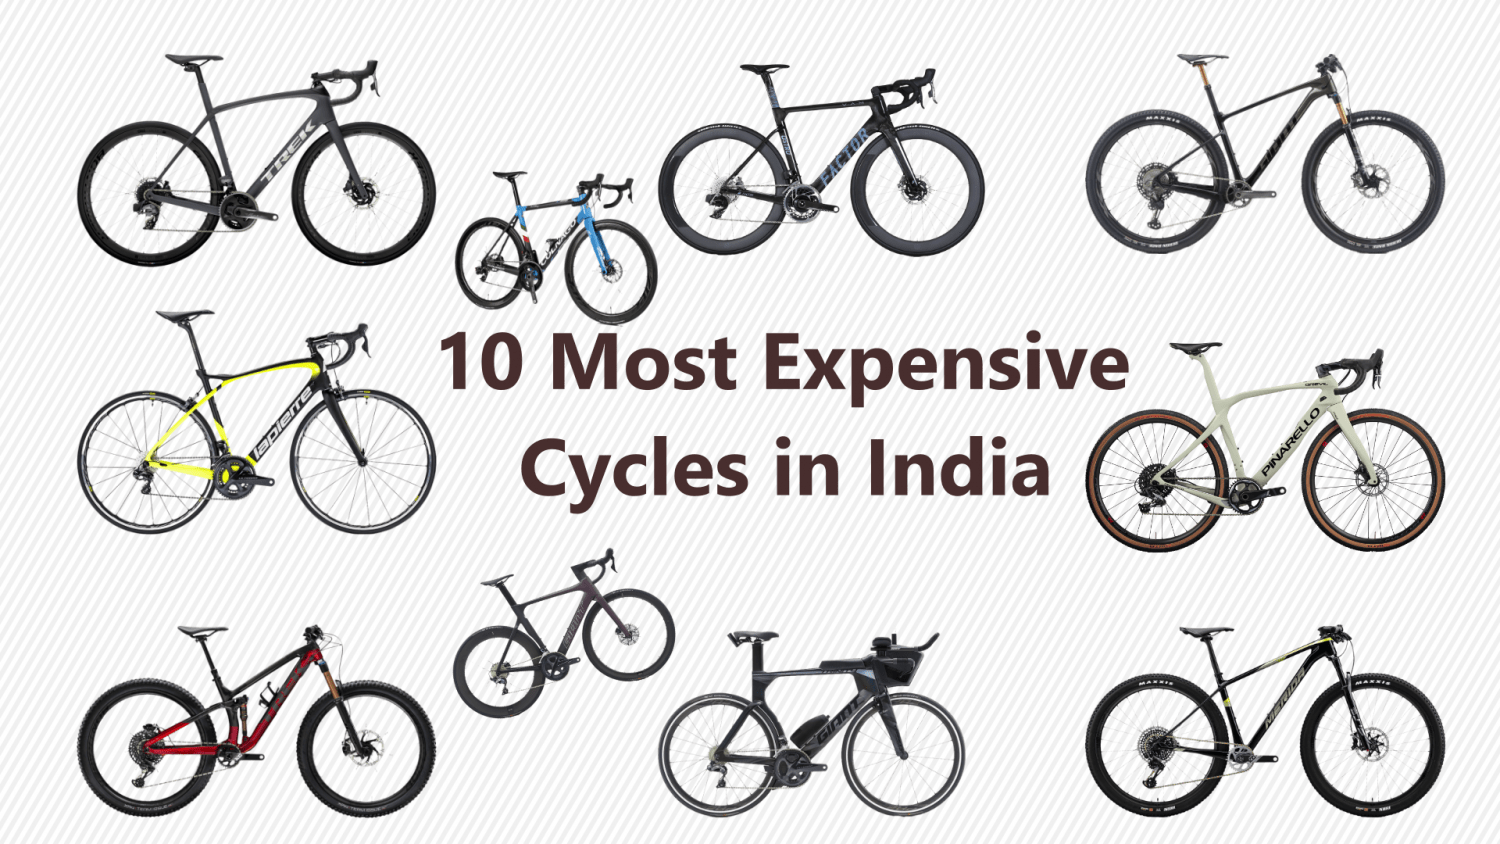 10 most expensive cycles in India